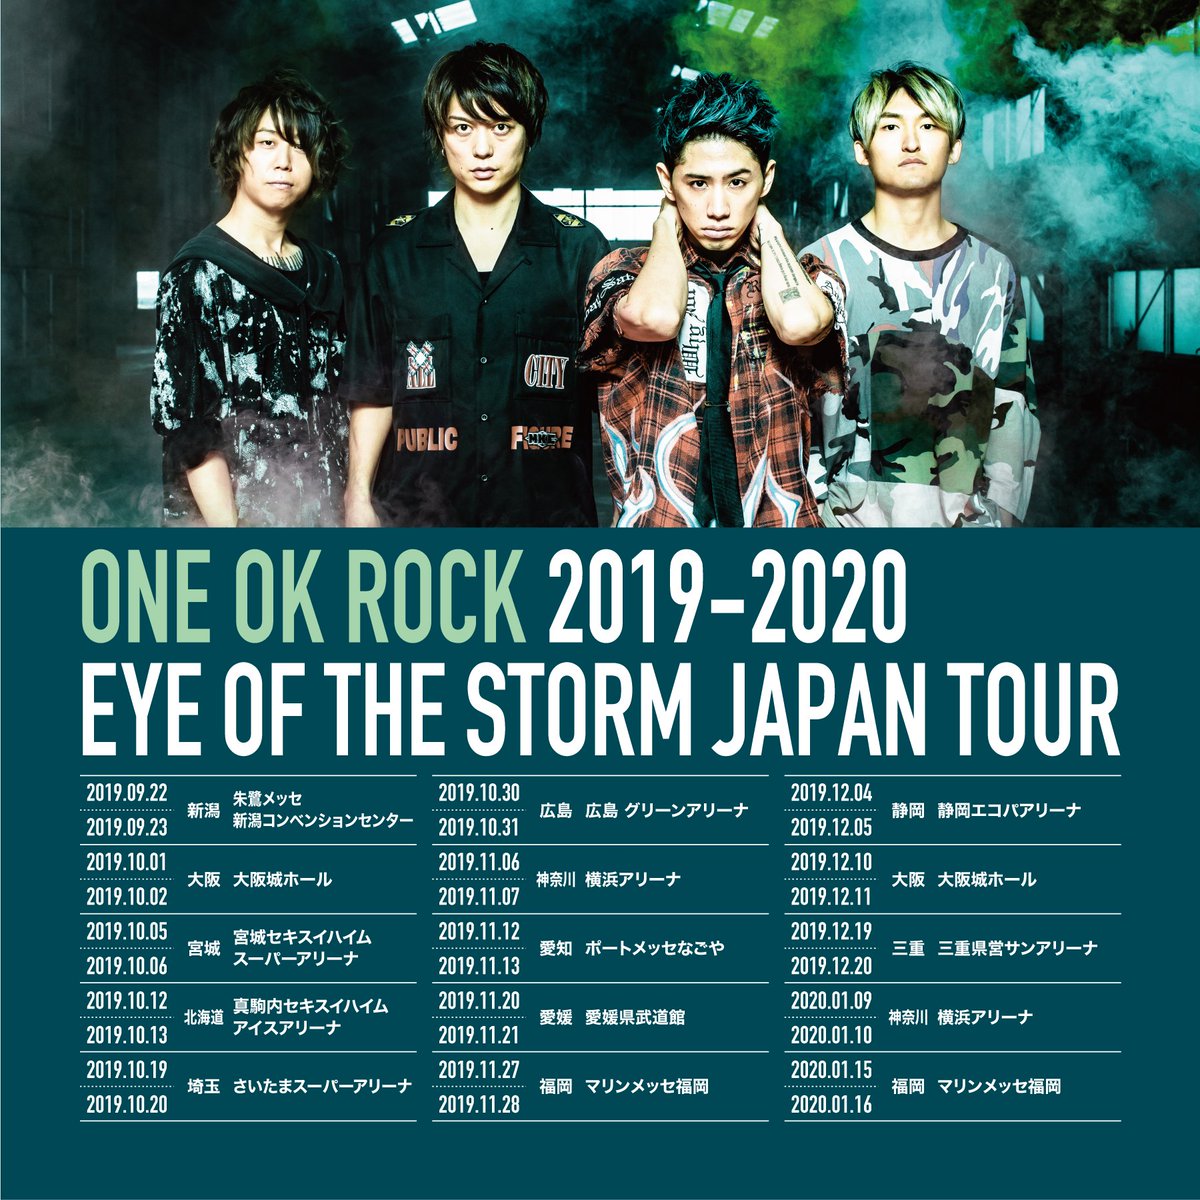 One Ok Rock 話題の画像がわかるサイト